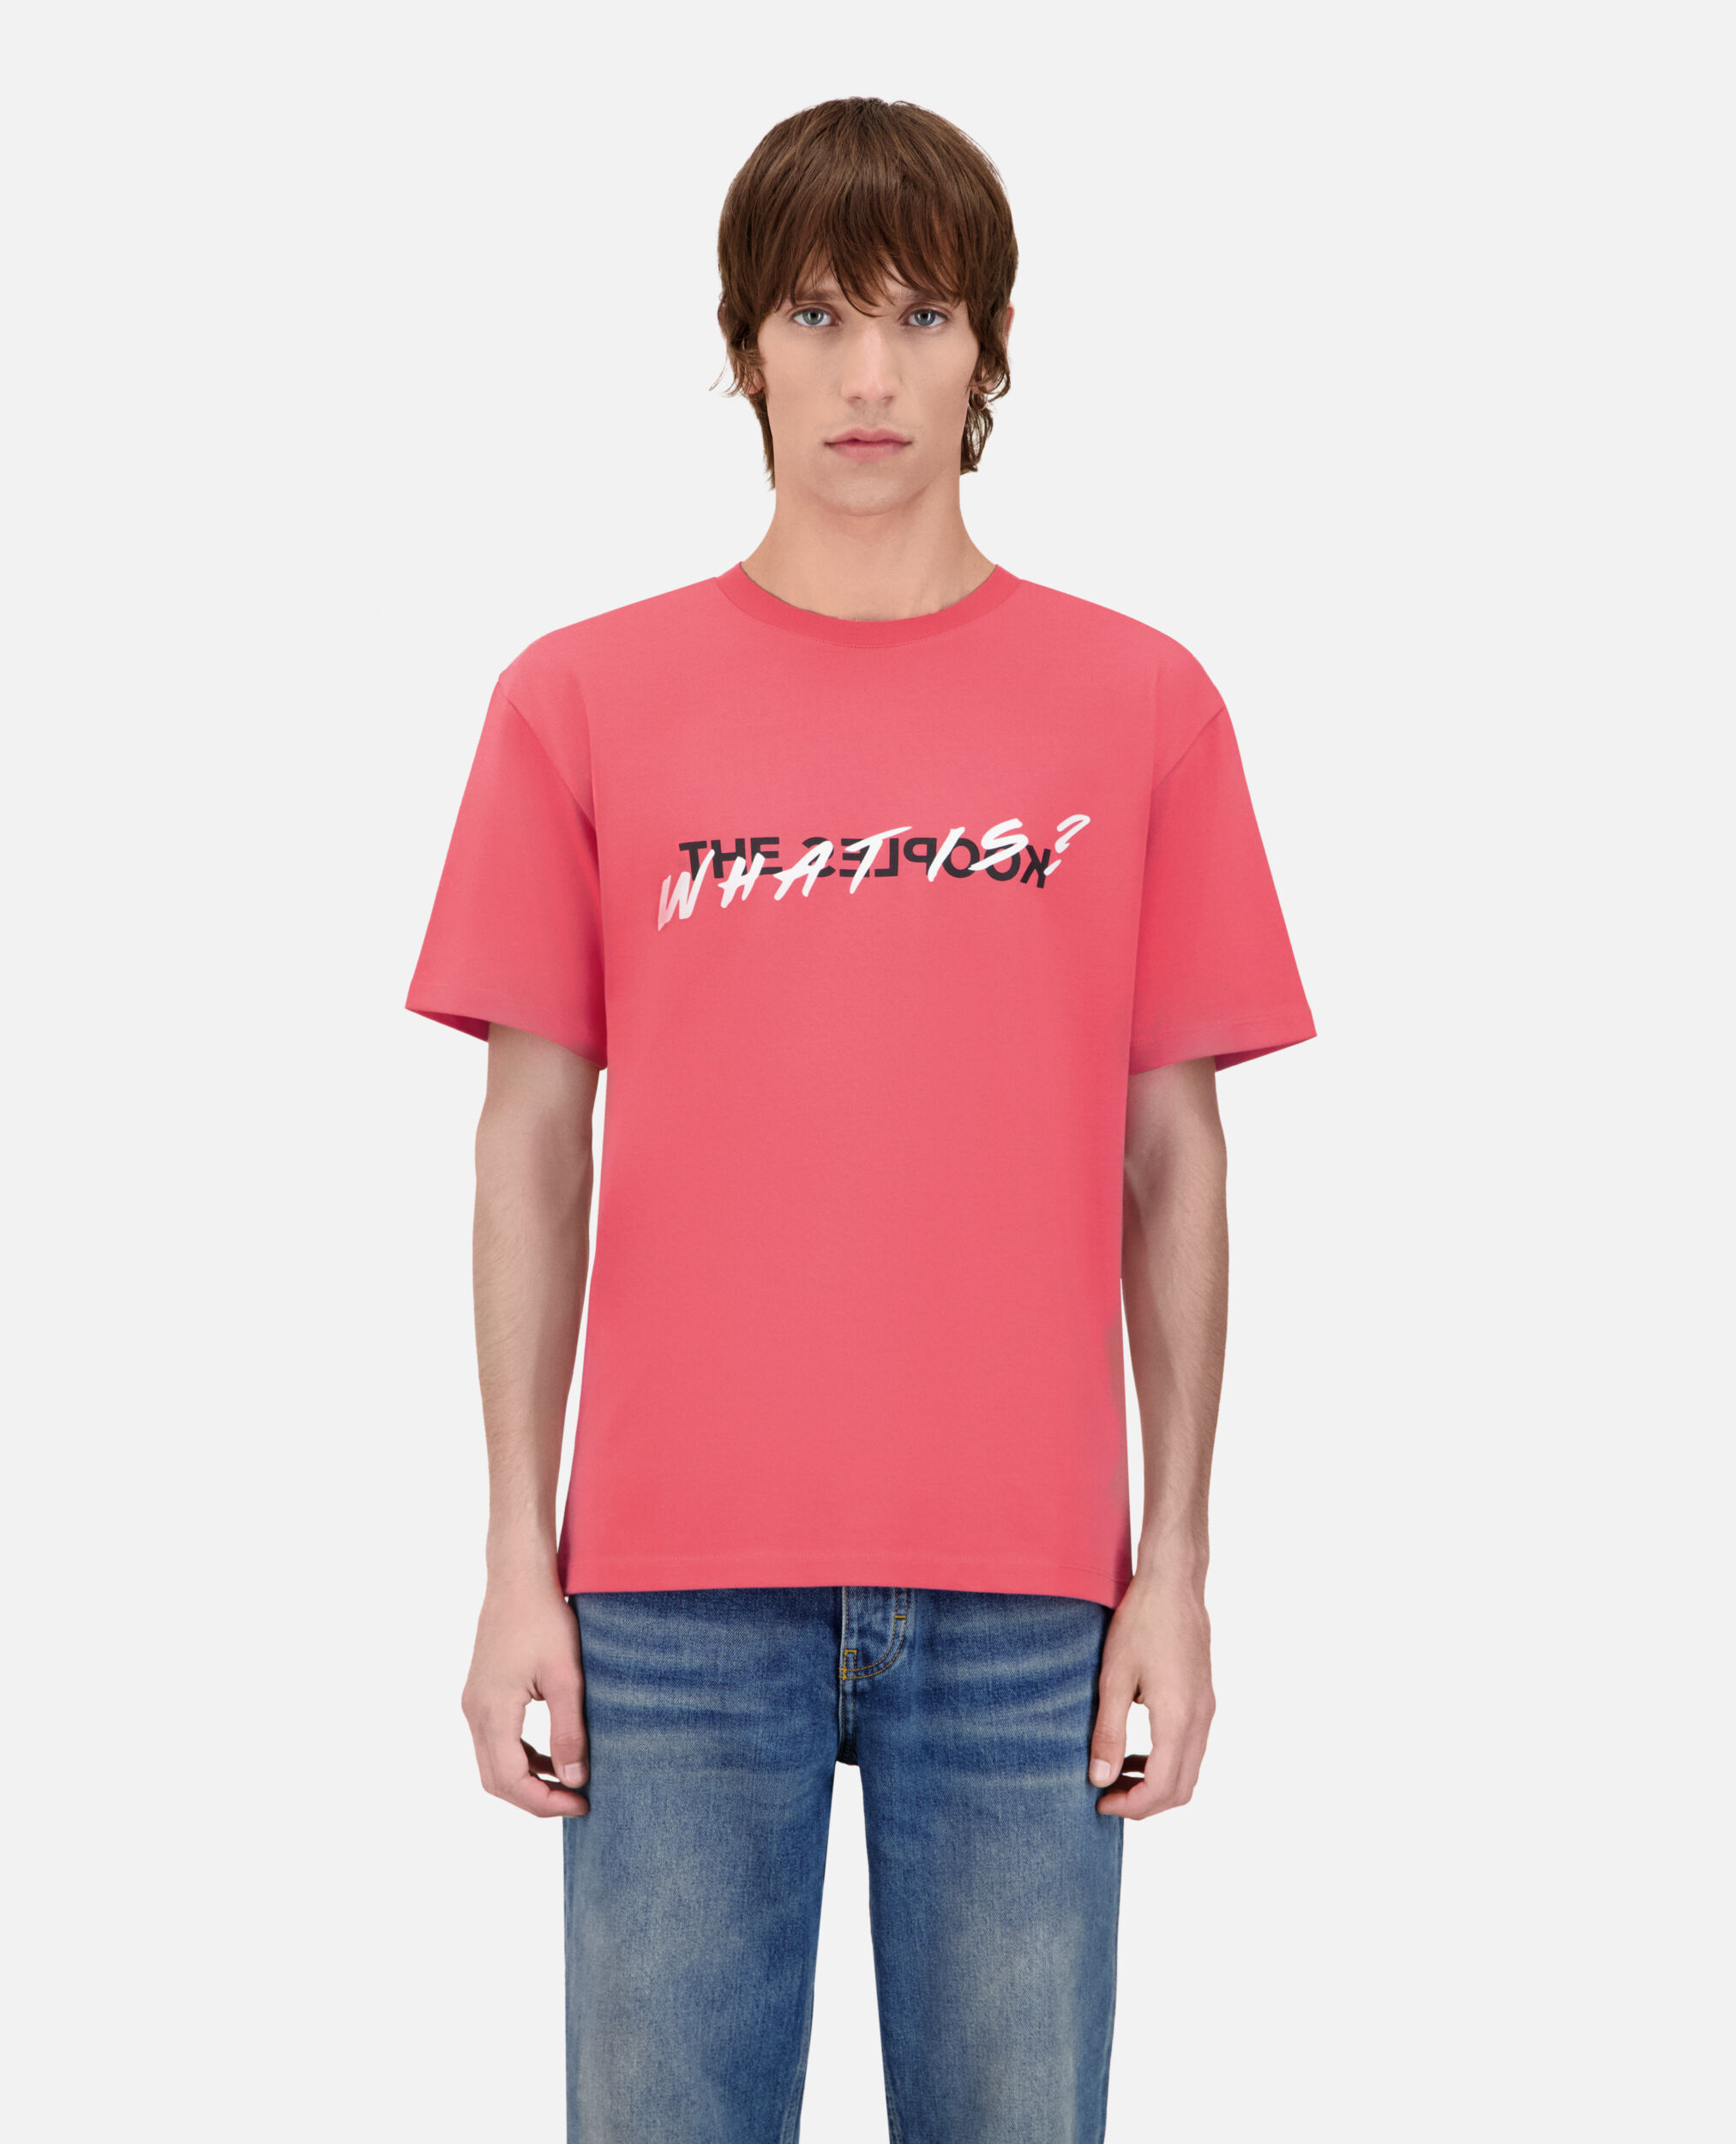 T-shirt What is rose, RETRO PINK, hi-res image number null